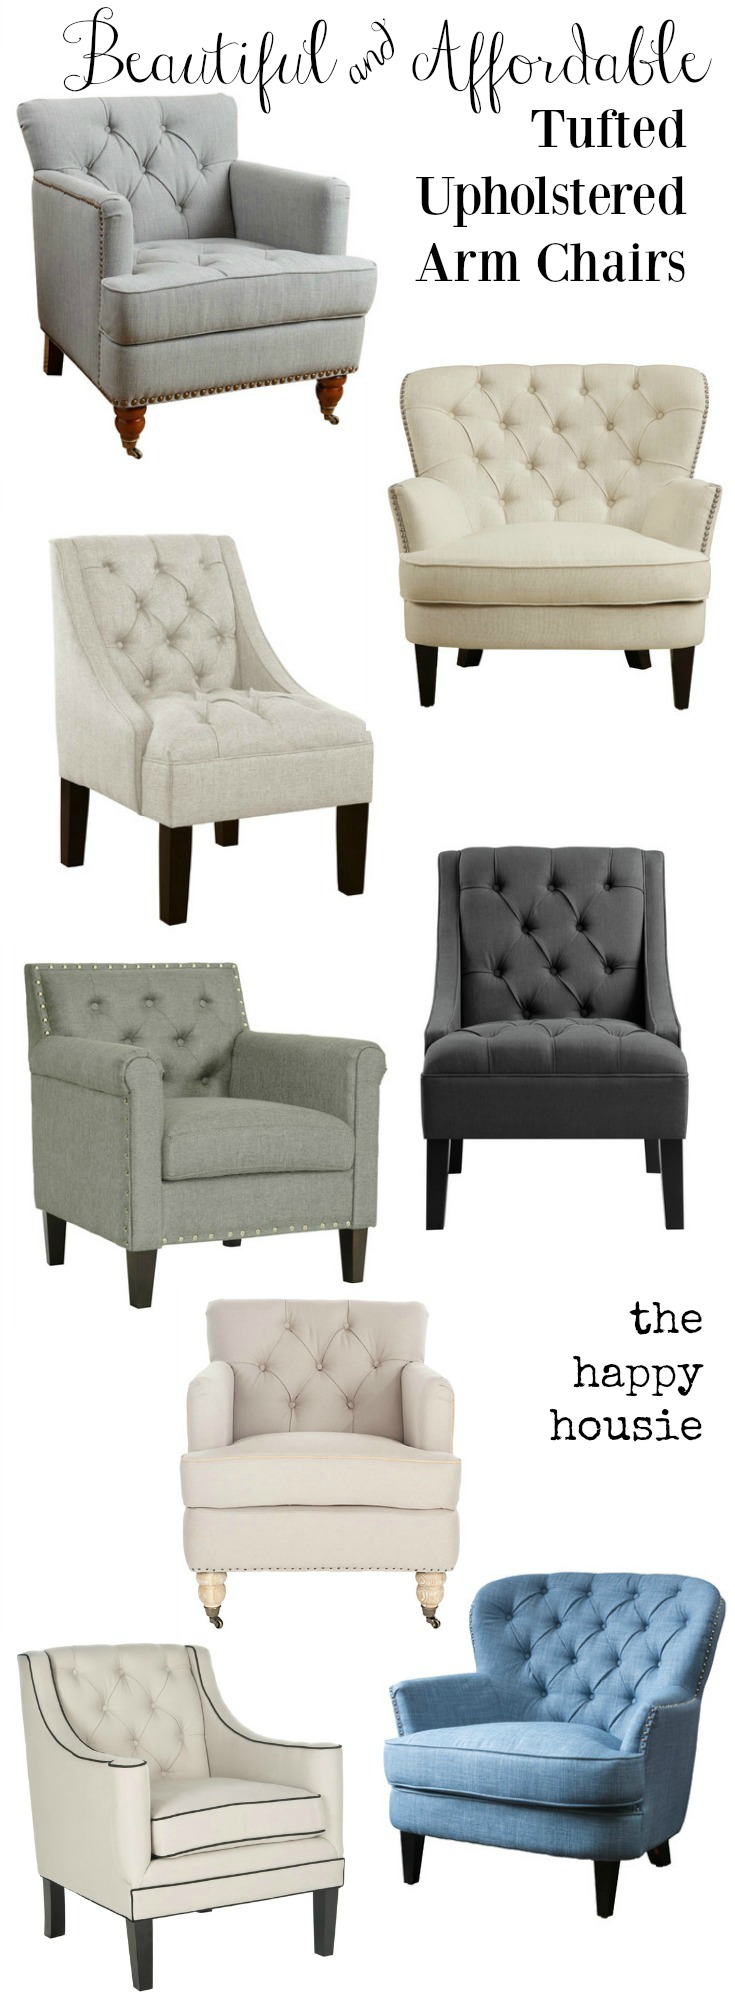 you-will-love-these-beautiful-and-affordable-tufted-upholstered-arm-chairs-featured-at-the-happy-housie